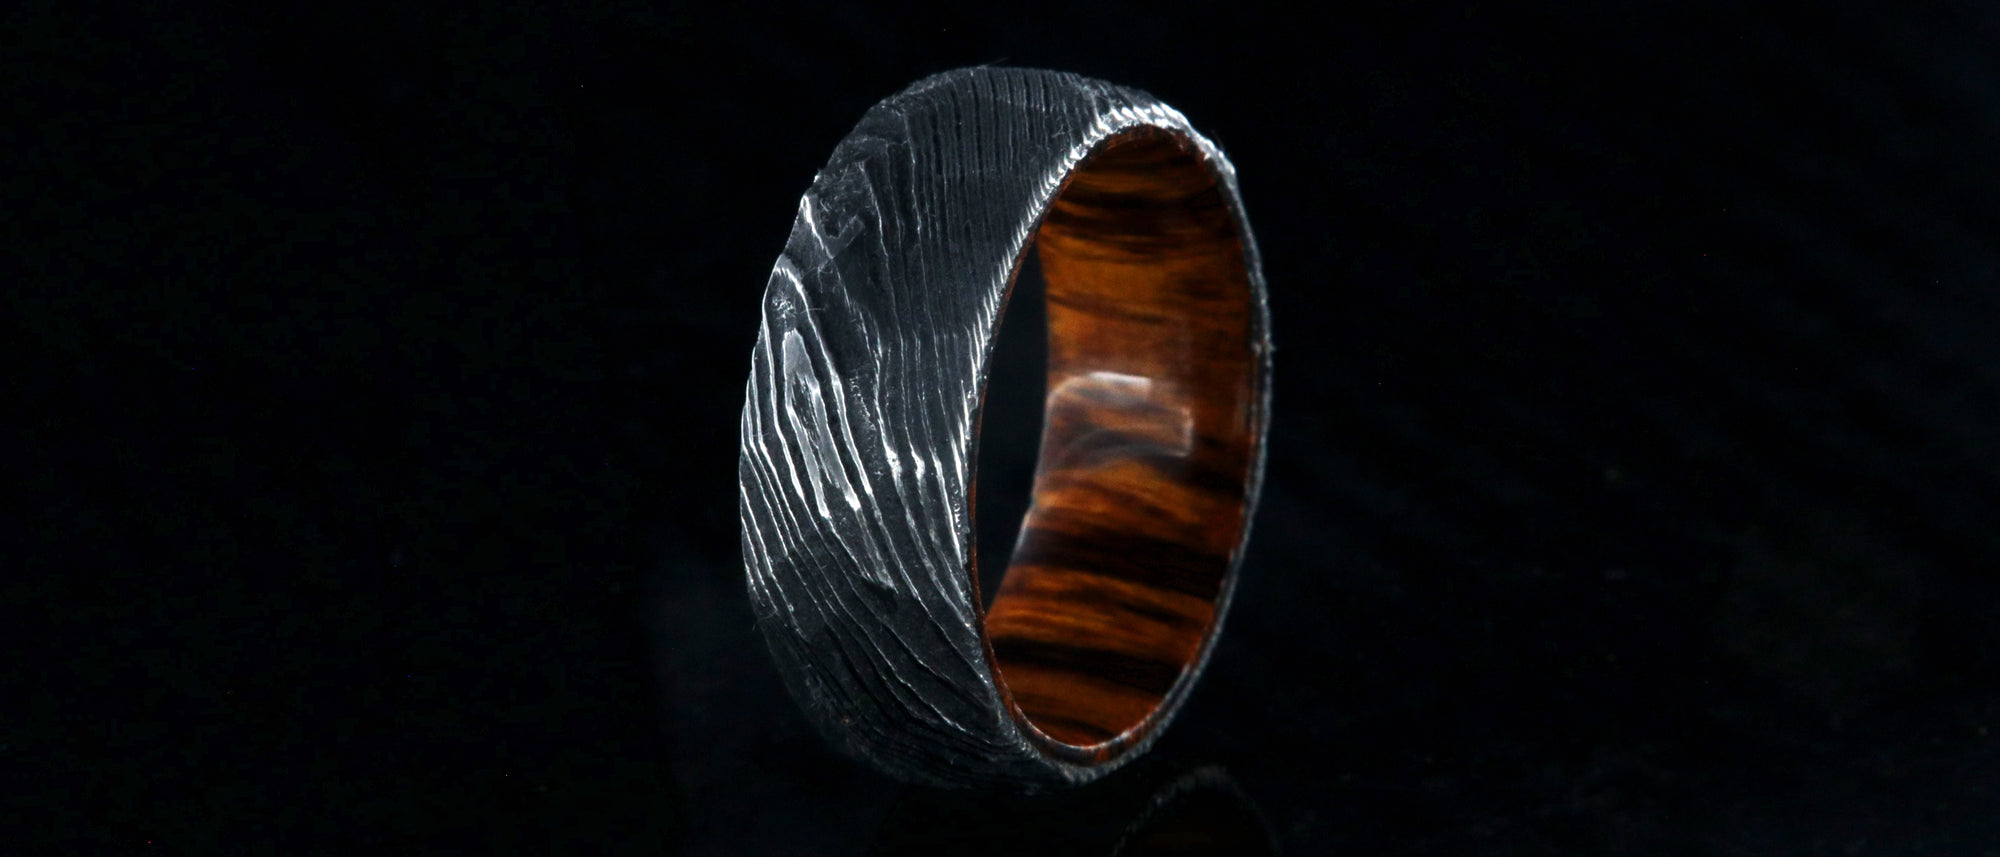 Damascus Steel: A Stunning Symbol of Strength and Love